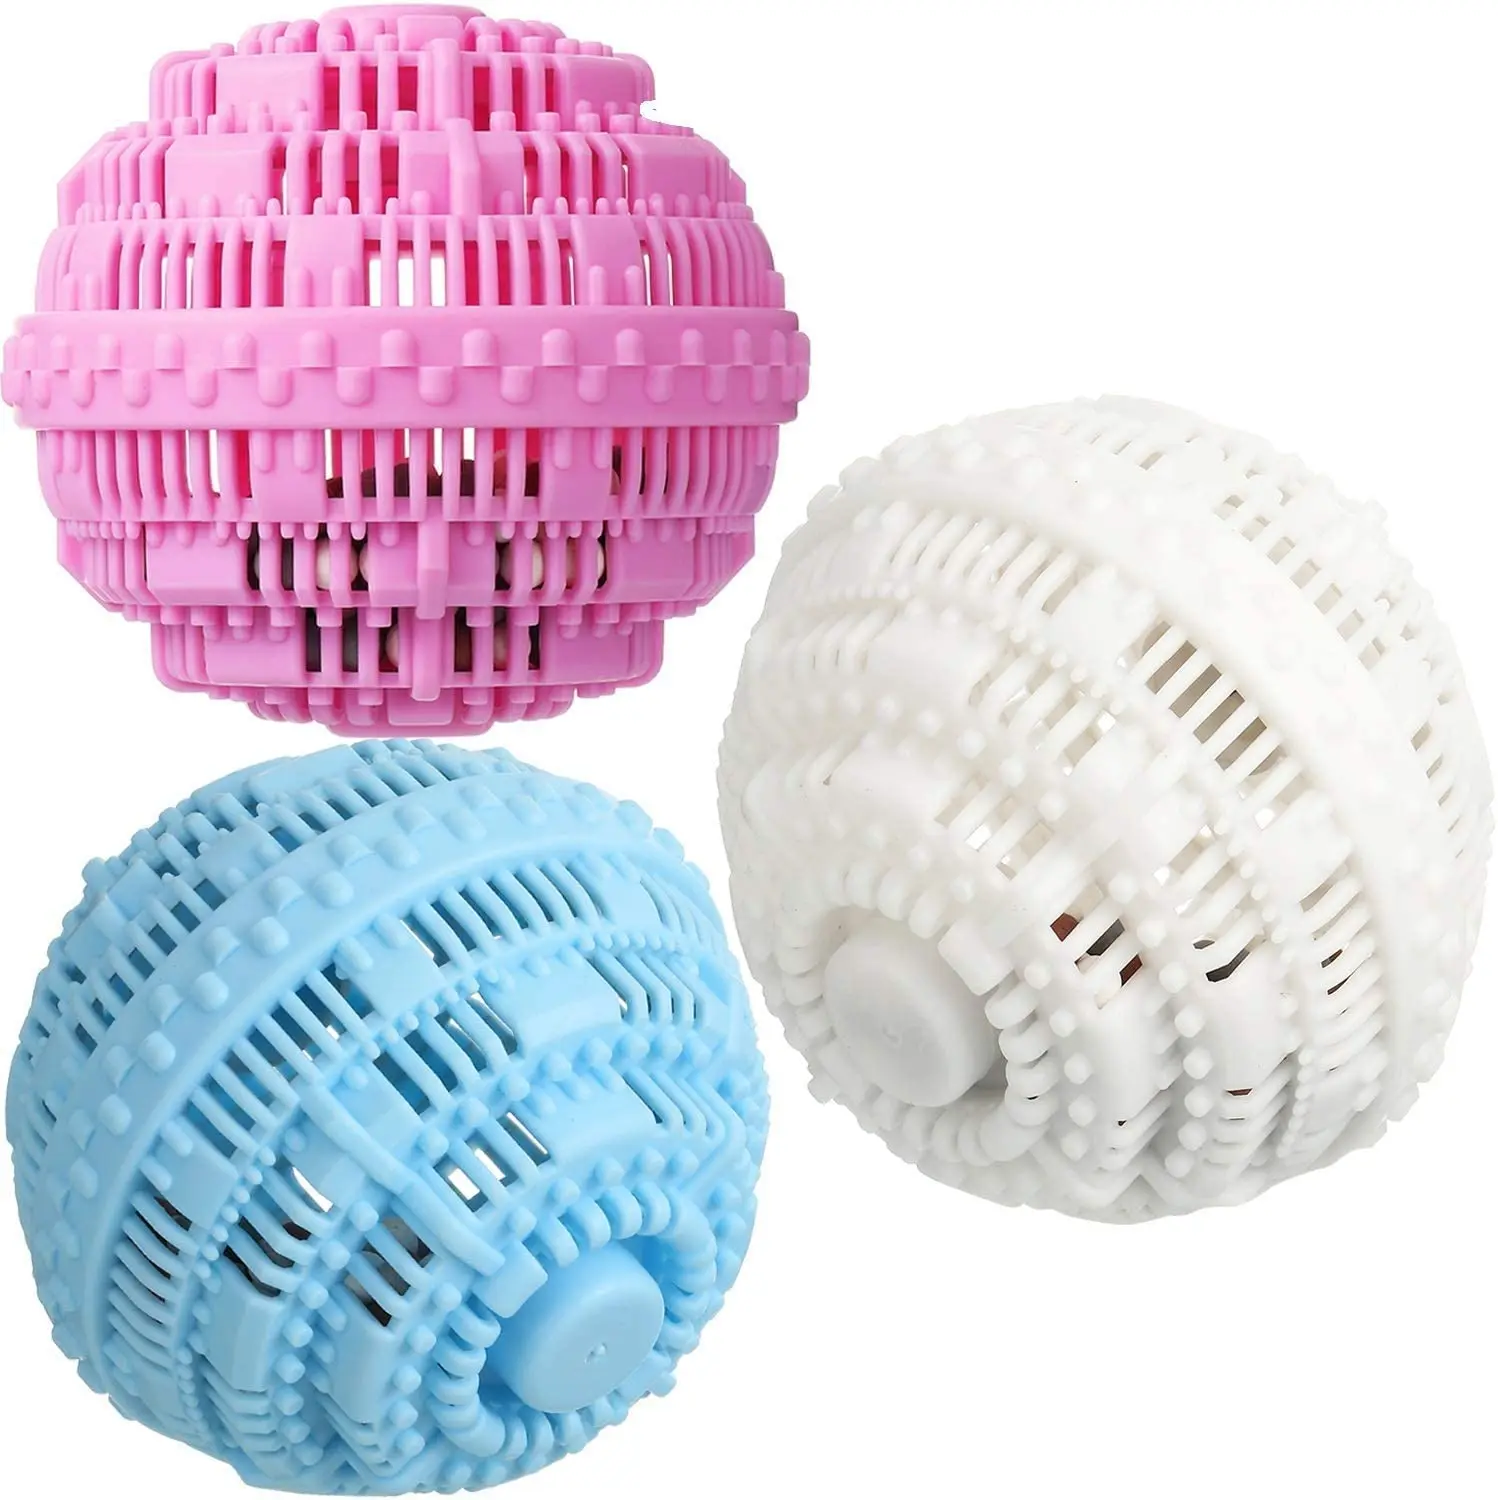 How Does The Negative Ion Laundry Ball Work? FAQ Taiyuan, 45% OFF